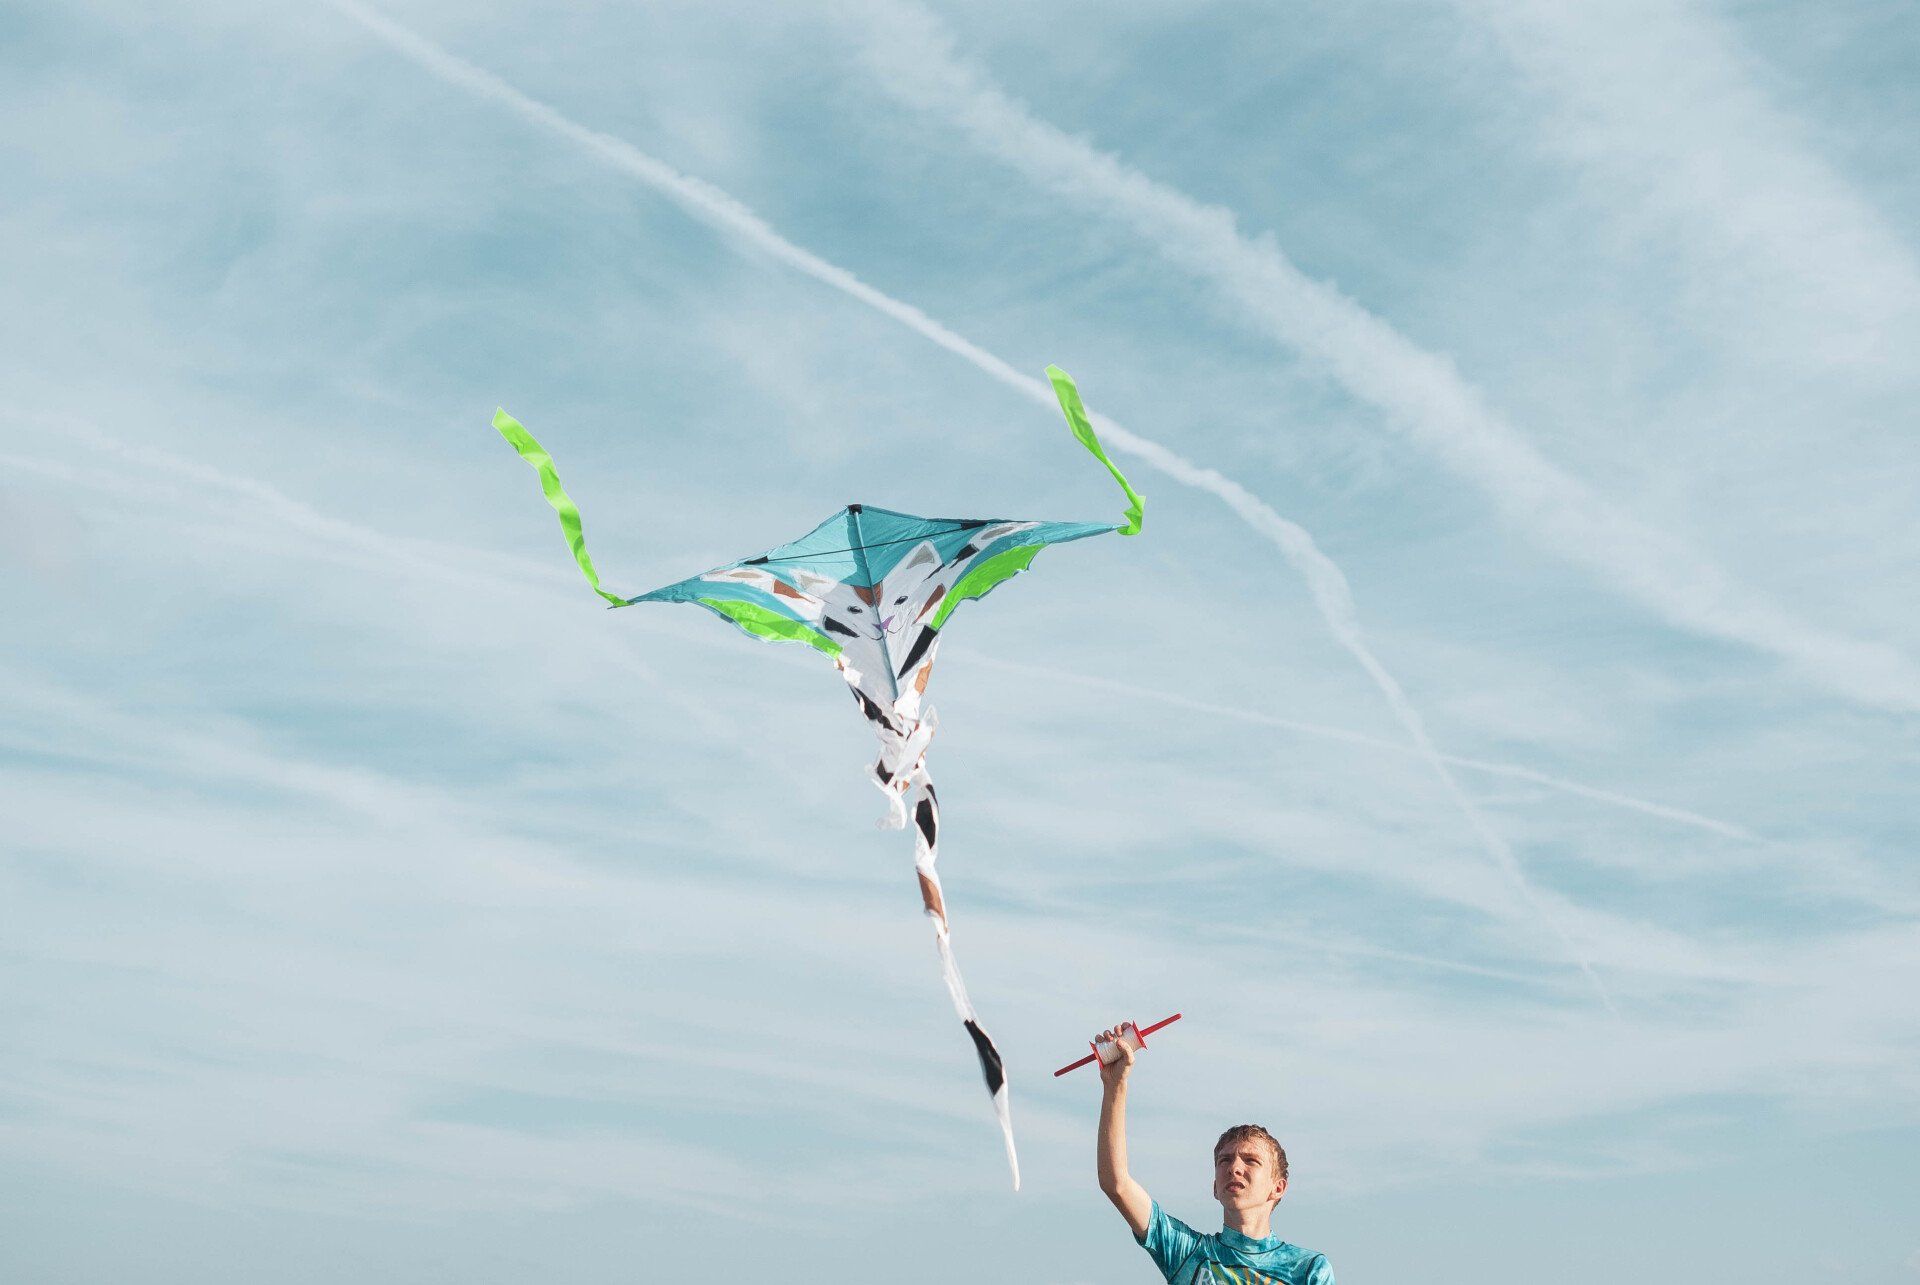 A man is flying a kite in the sky.